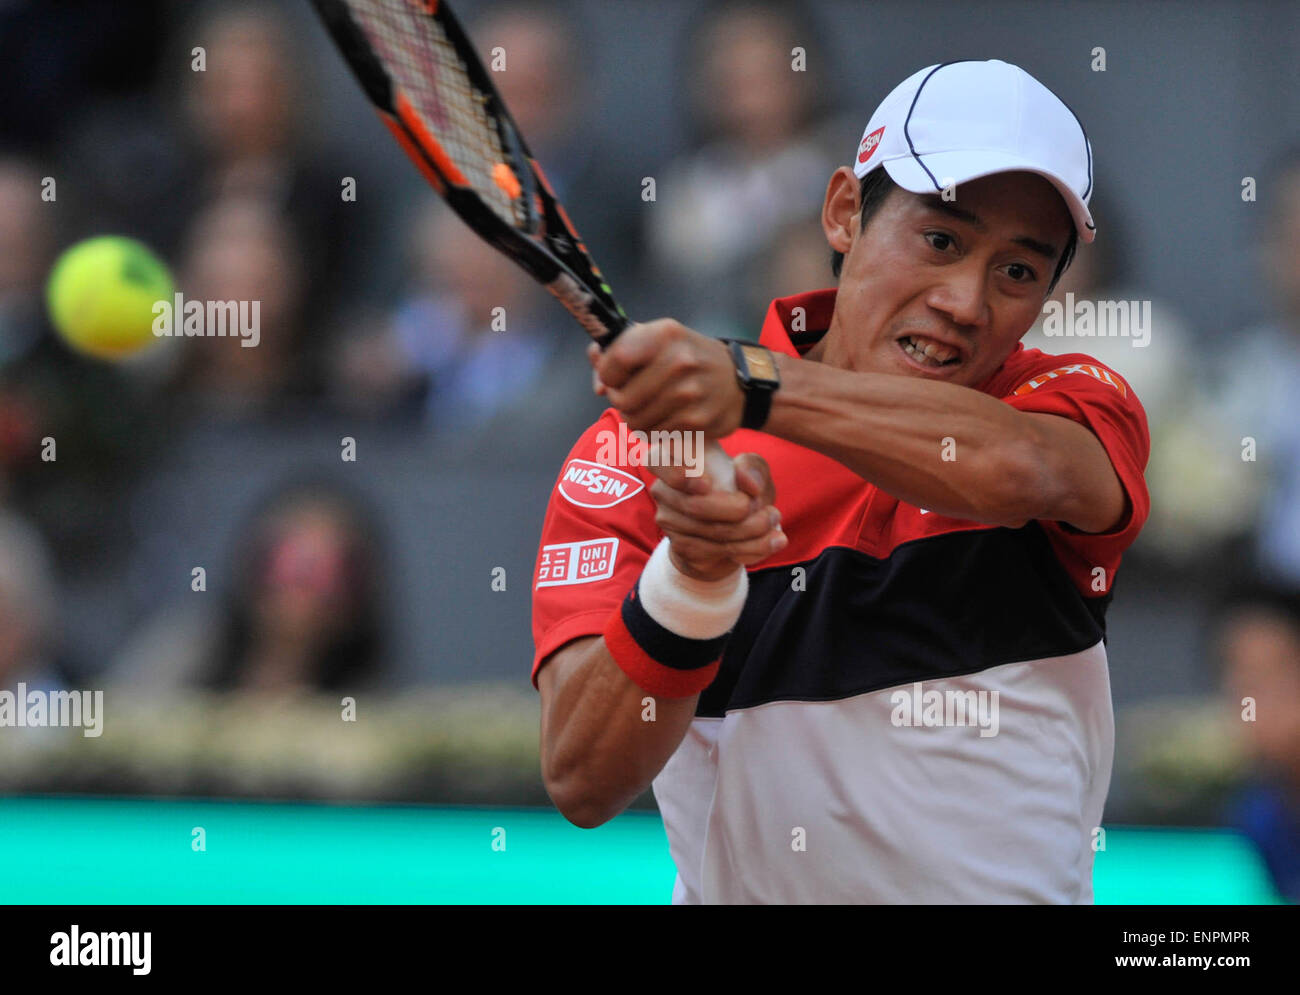 Madrid, Spain. 9th May, 2015. Kei Nishikori of Japan hits a return during a men's singles semifinal match against Andy Murray of Britain at the Madrid Open tennis tournament in Madrid, Spain, May 9, 2015. Kei Nishikori lost 0-2. Credit:  Xie Haining/Xinhua/Alamy Live News Stock Photo